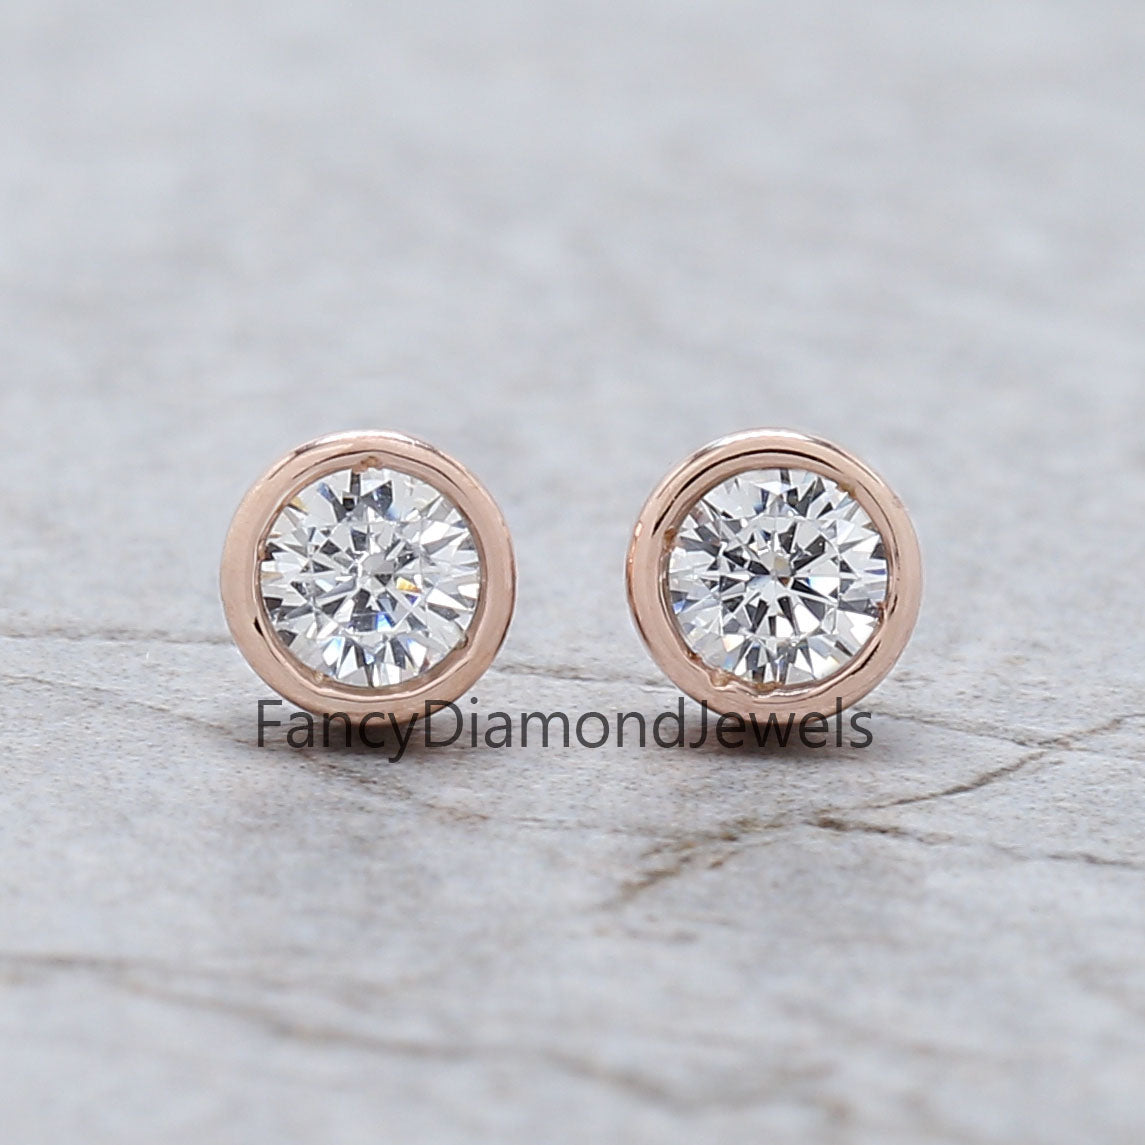 Round White Color Diamond Earring Engagement Wedding Gift Earring 14K Solid Rose White Yellow Gold Earring 0.34 CT KD1000